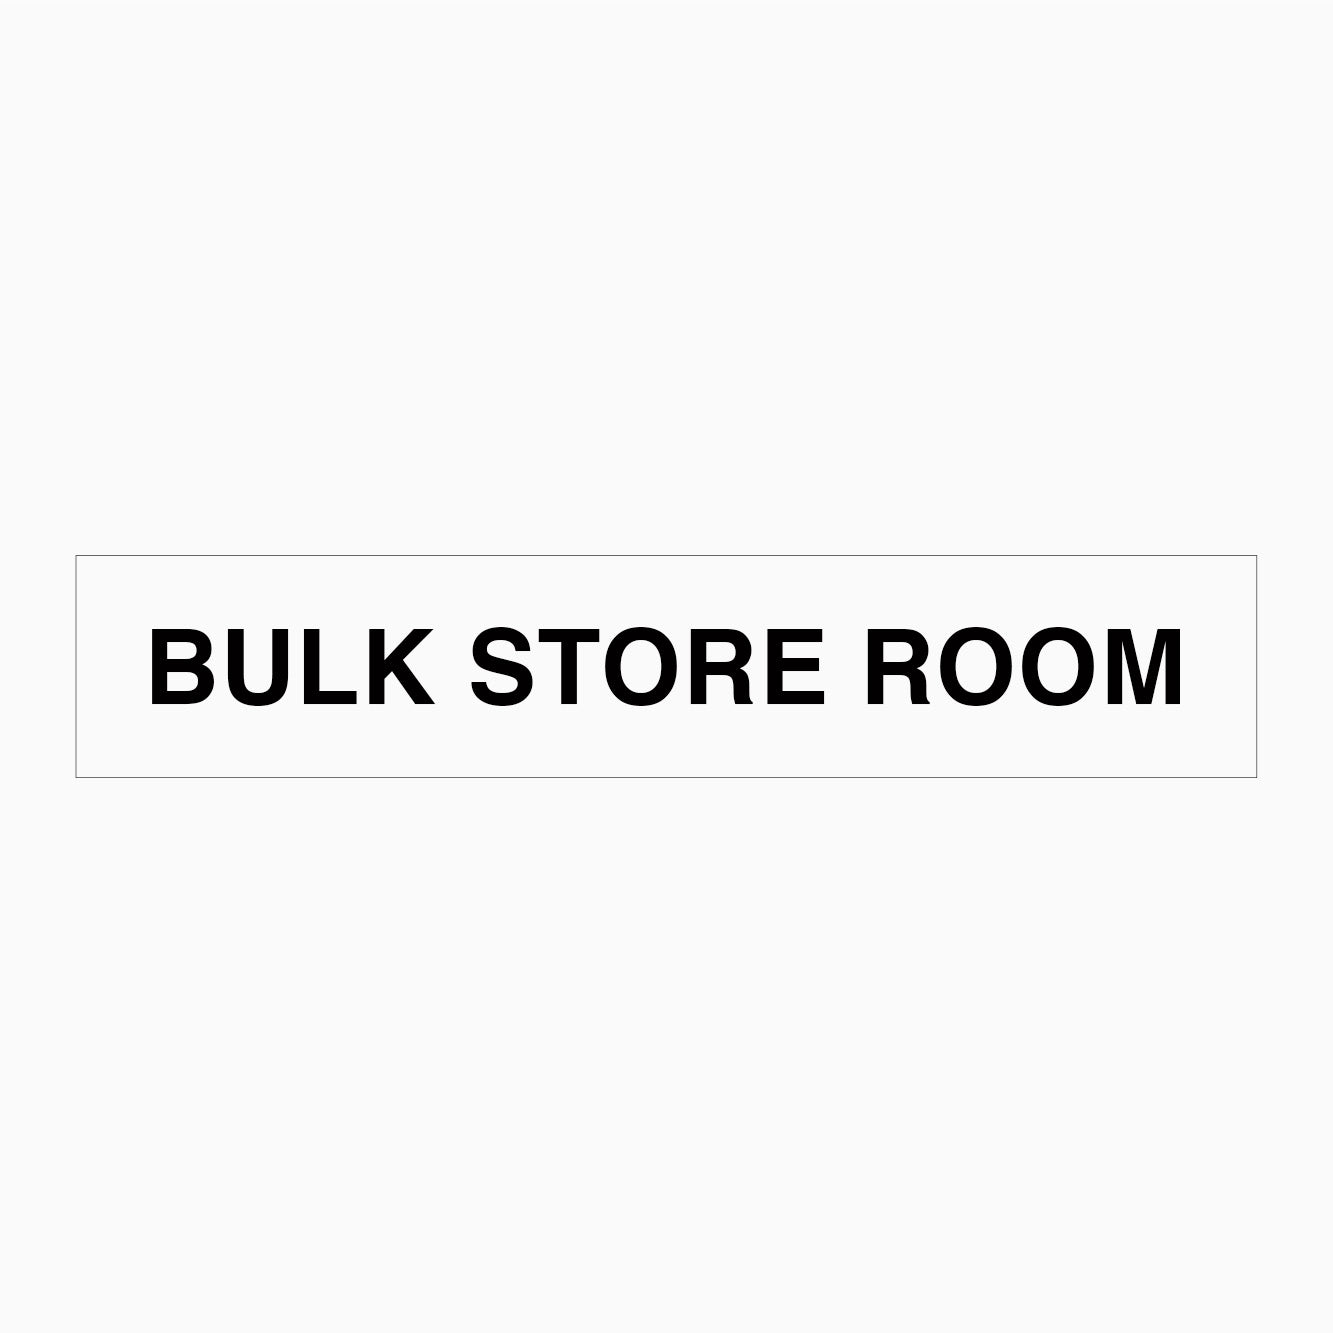 BULK STORE ROOM SIGN - STATUTORY SIGNS IN AUSTRALIA AT GET SIGNS